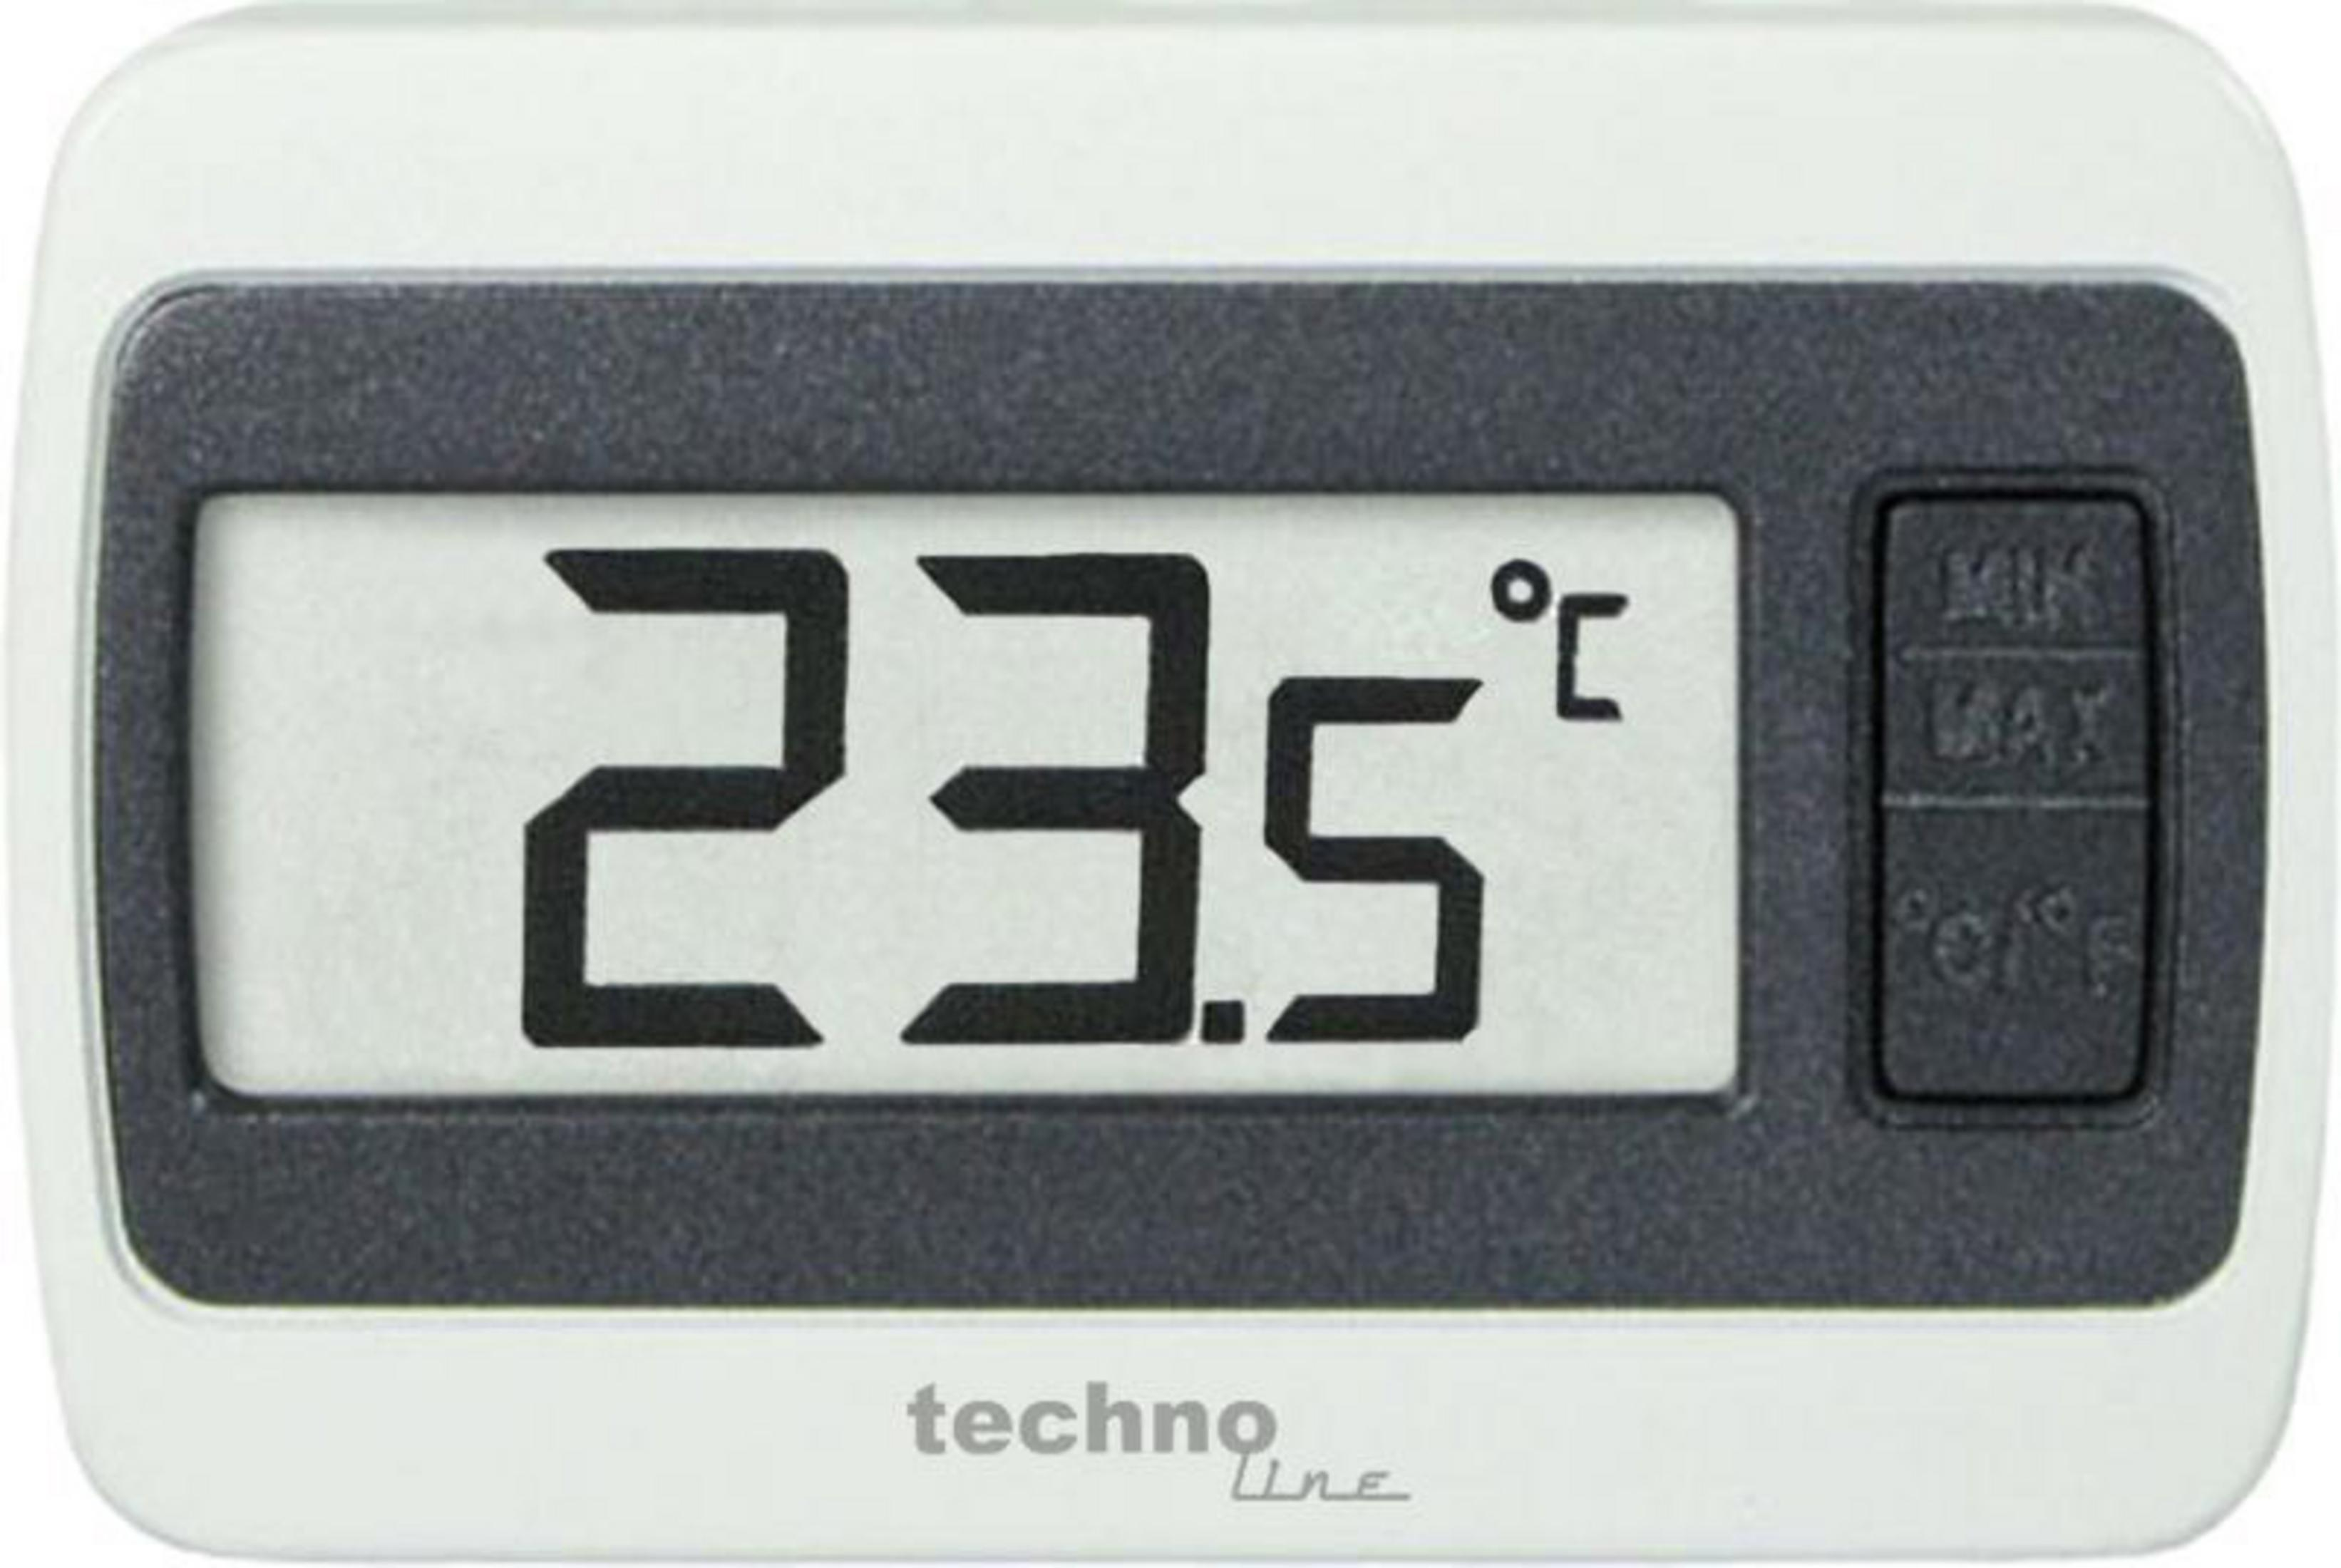 TECHNOLINE WS 7002 WEISS Thermometer